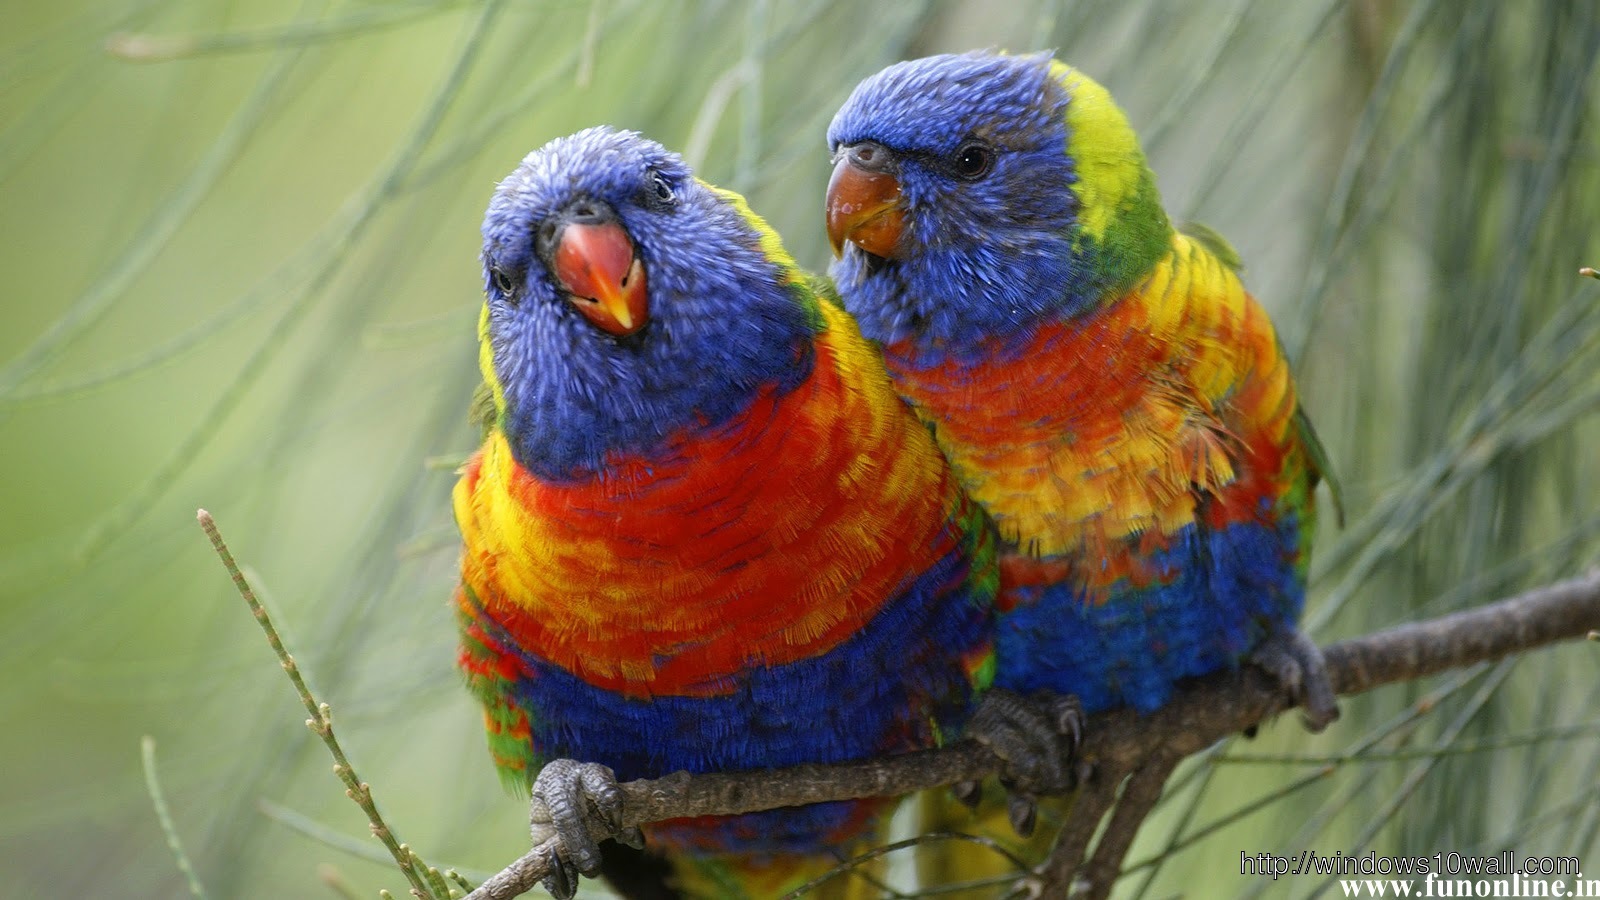 Colorful Pair Of Parrot HD Wallpaper